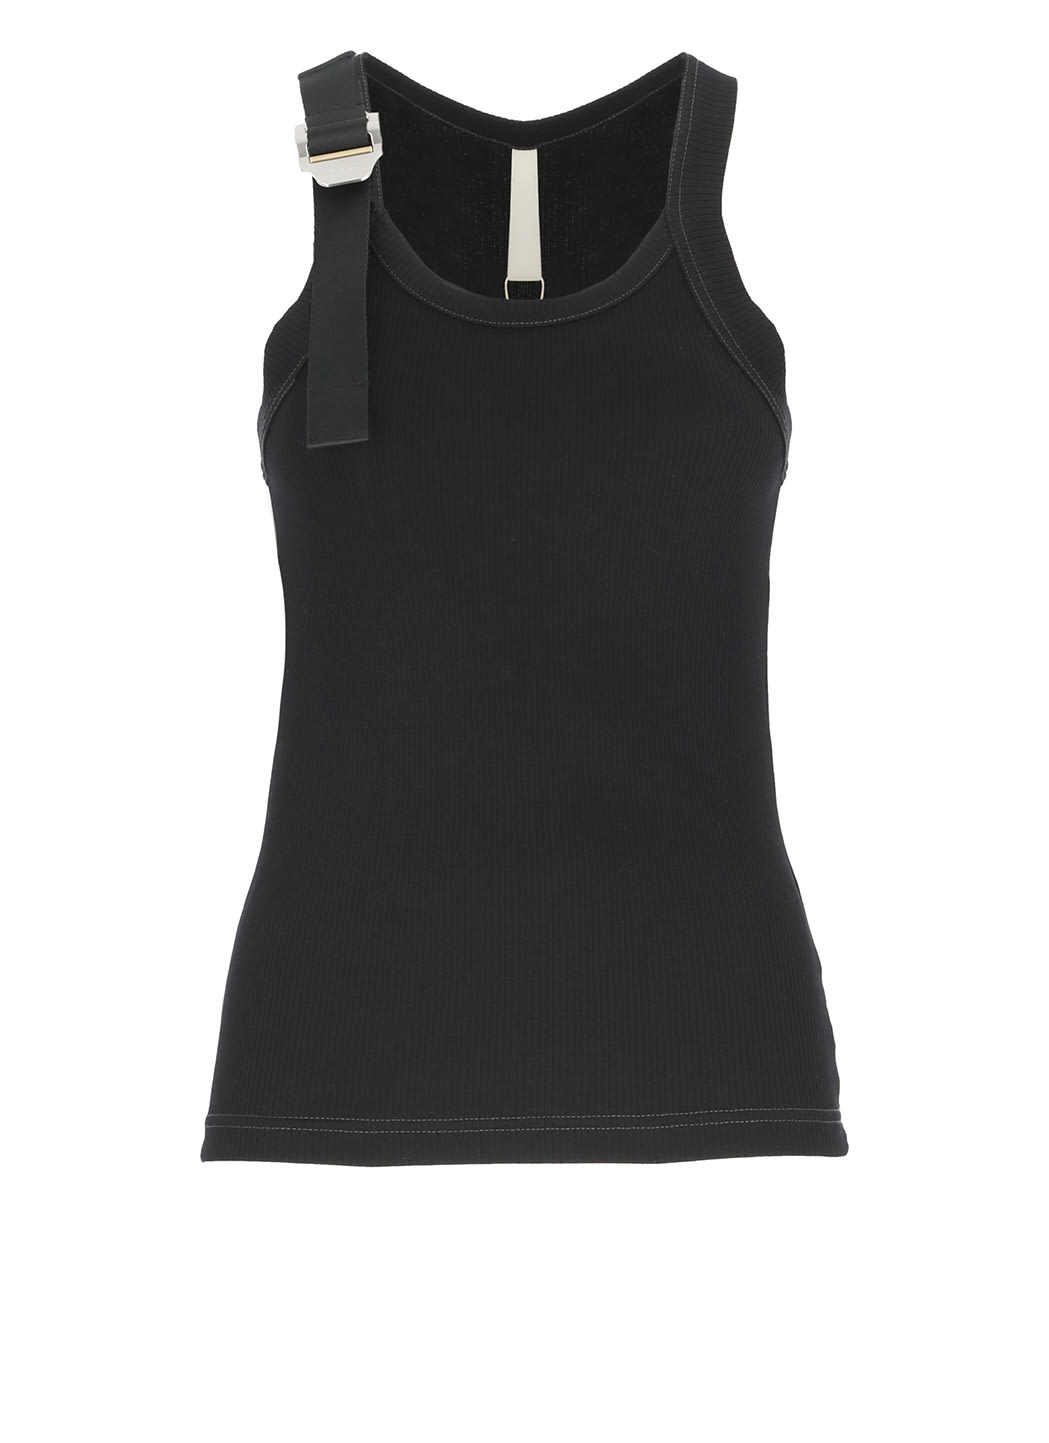 DION LEE SAFETY TOP